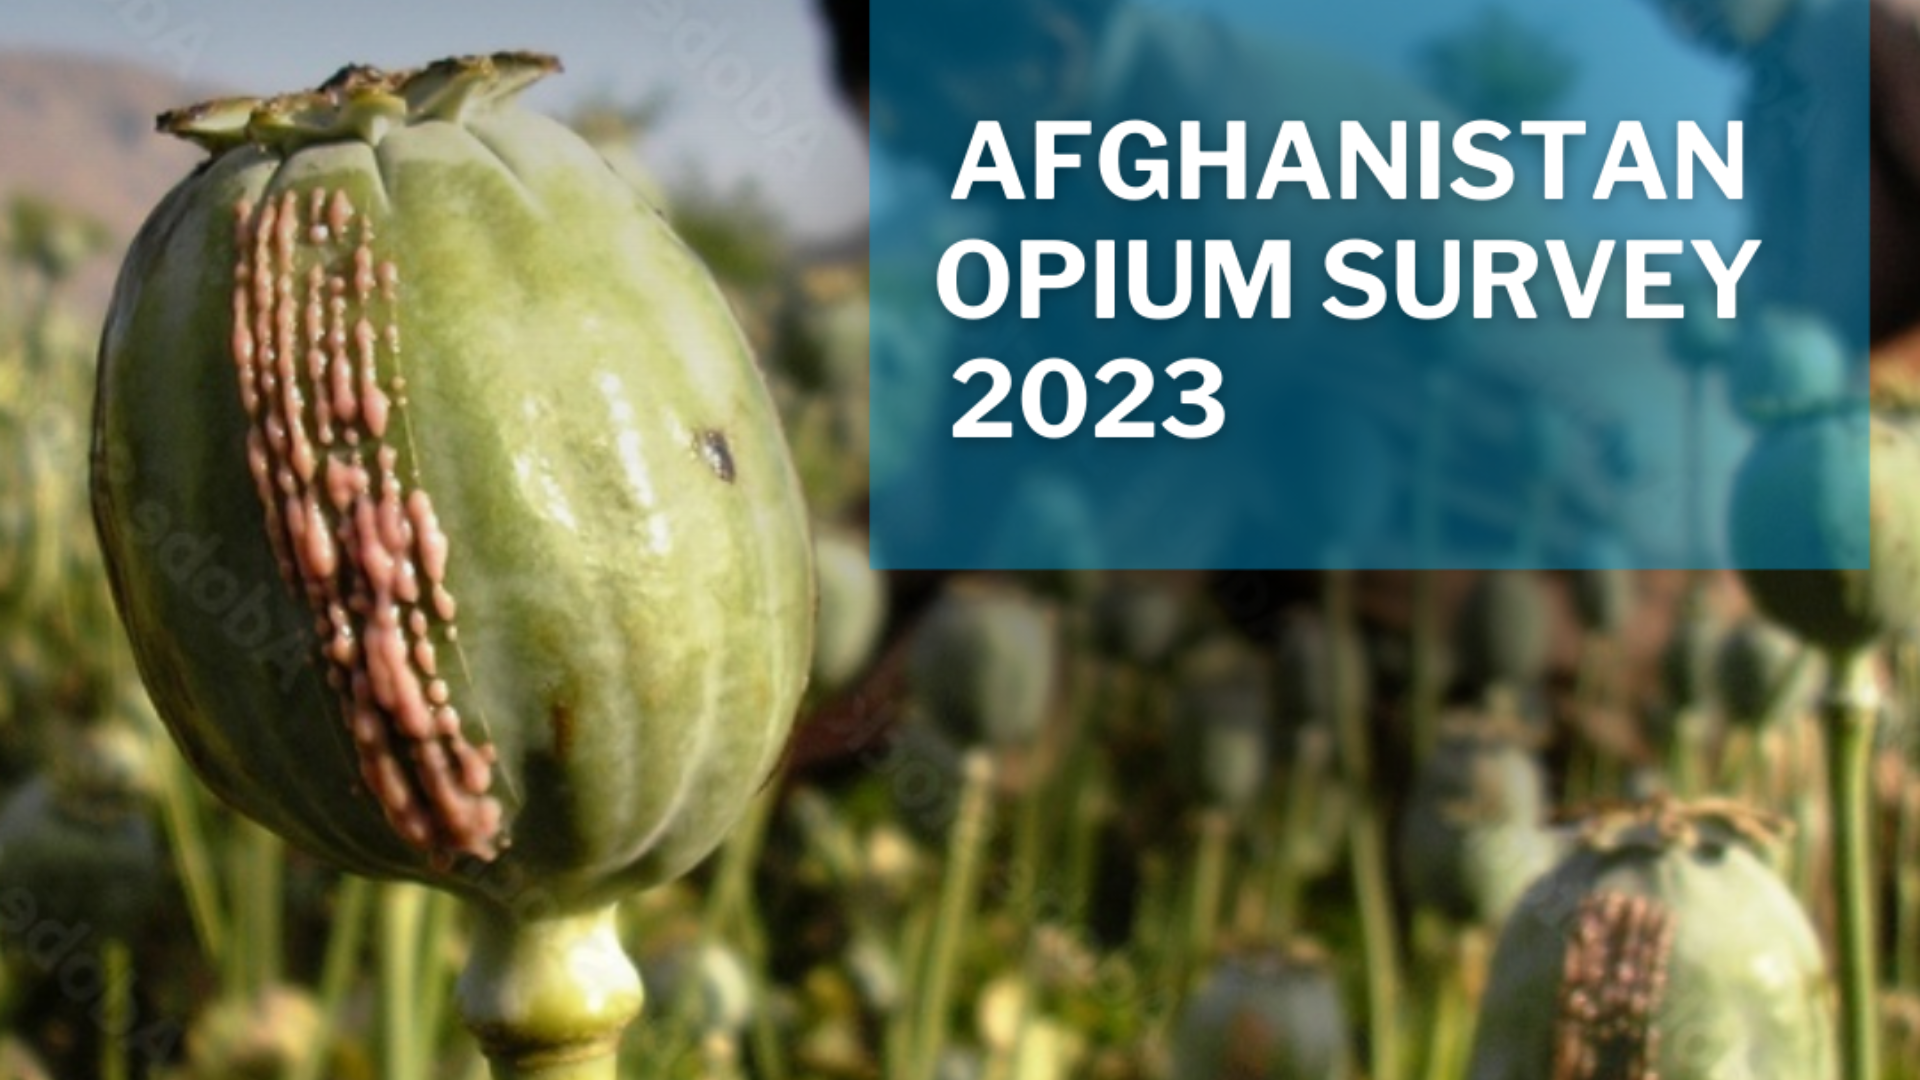 Afghanistan opium cultivation in 2023 declined 95 per cent following drug ban: new UNODC survey